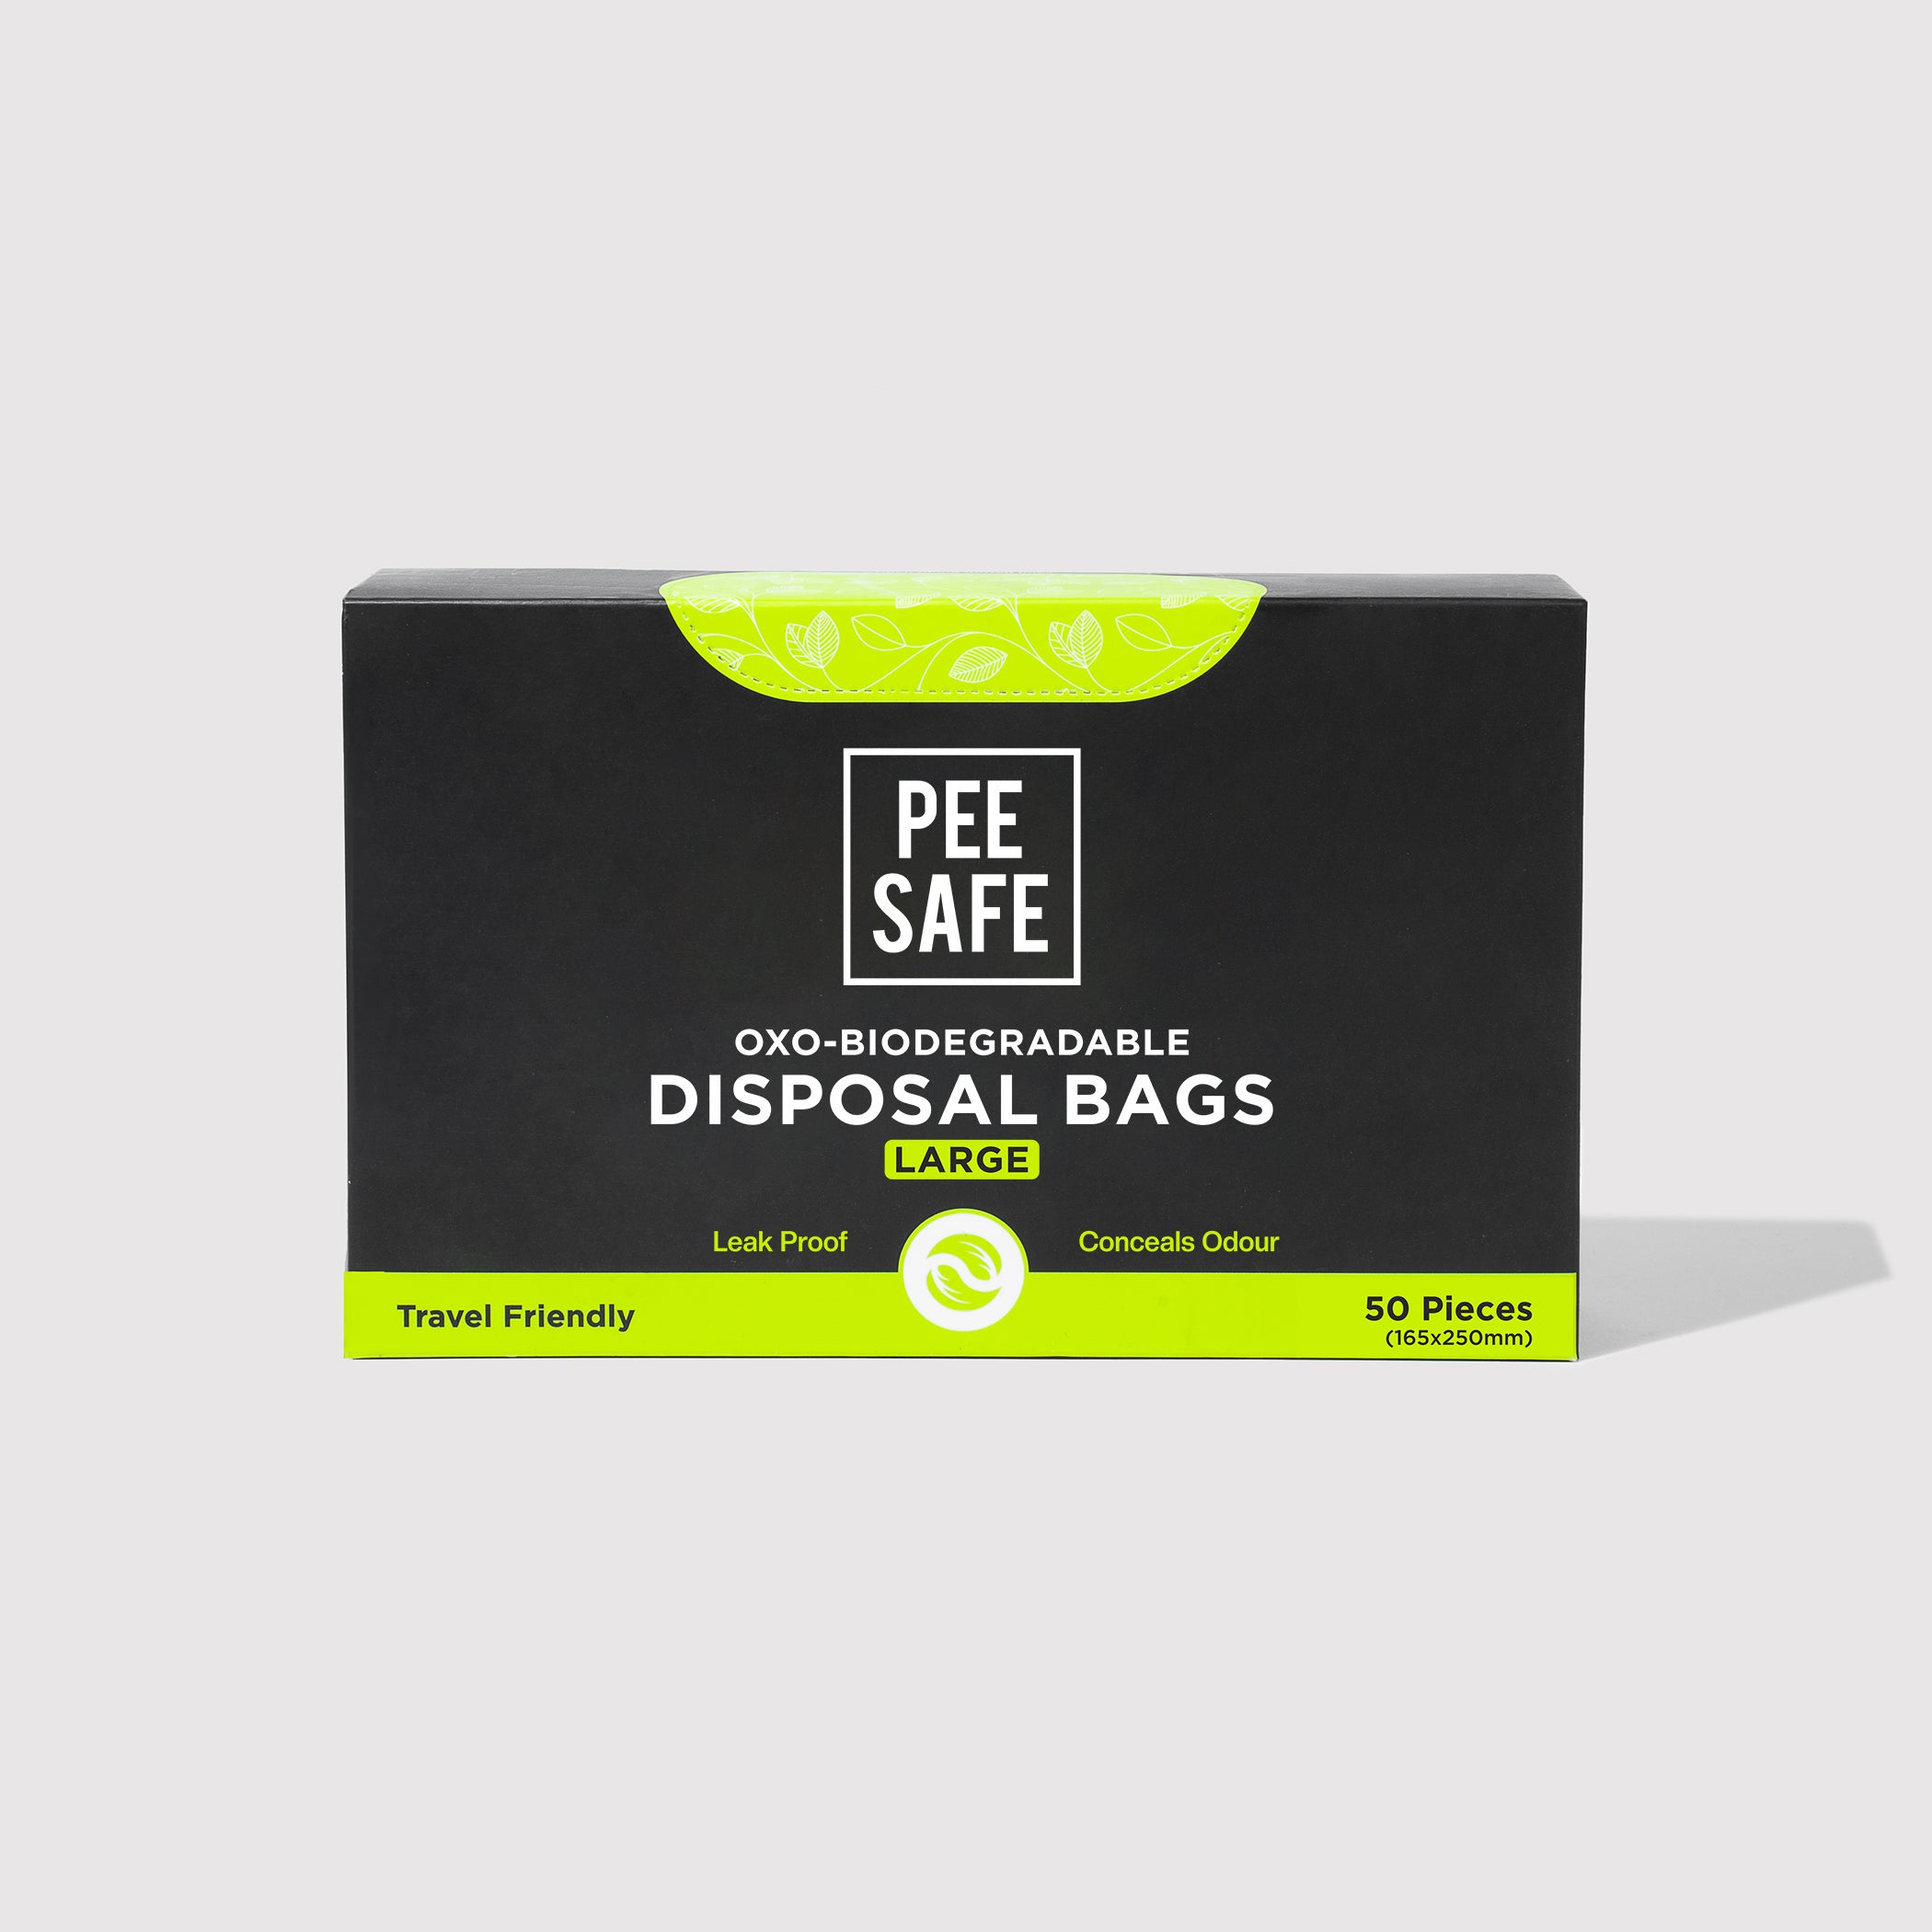 Pee Safe Oxo-Biodegradable Disposable Bags - 50 Bags (Large)